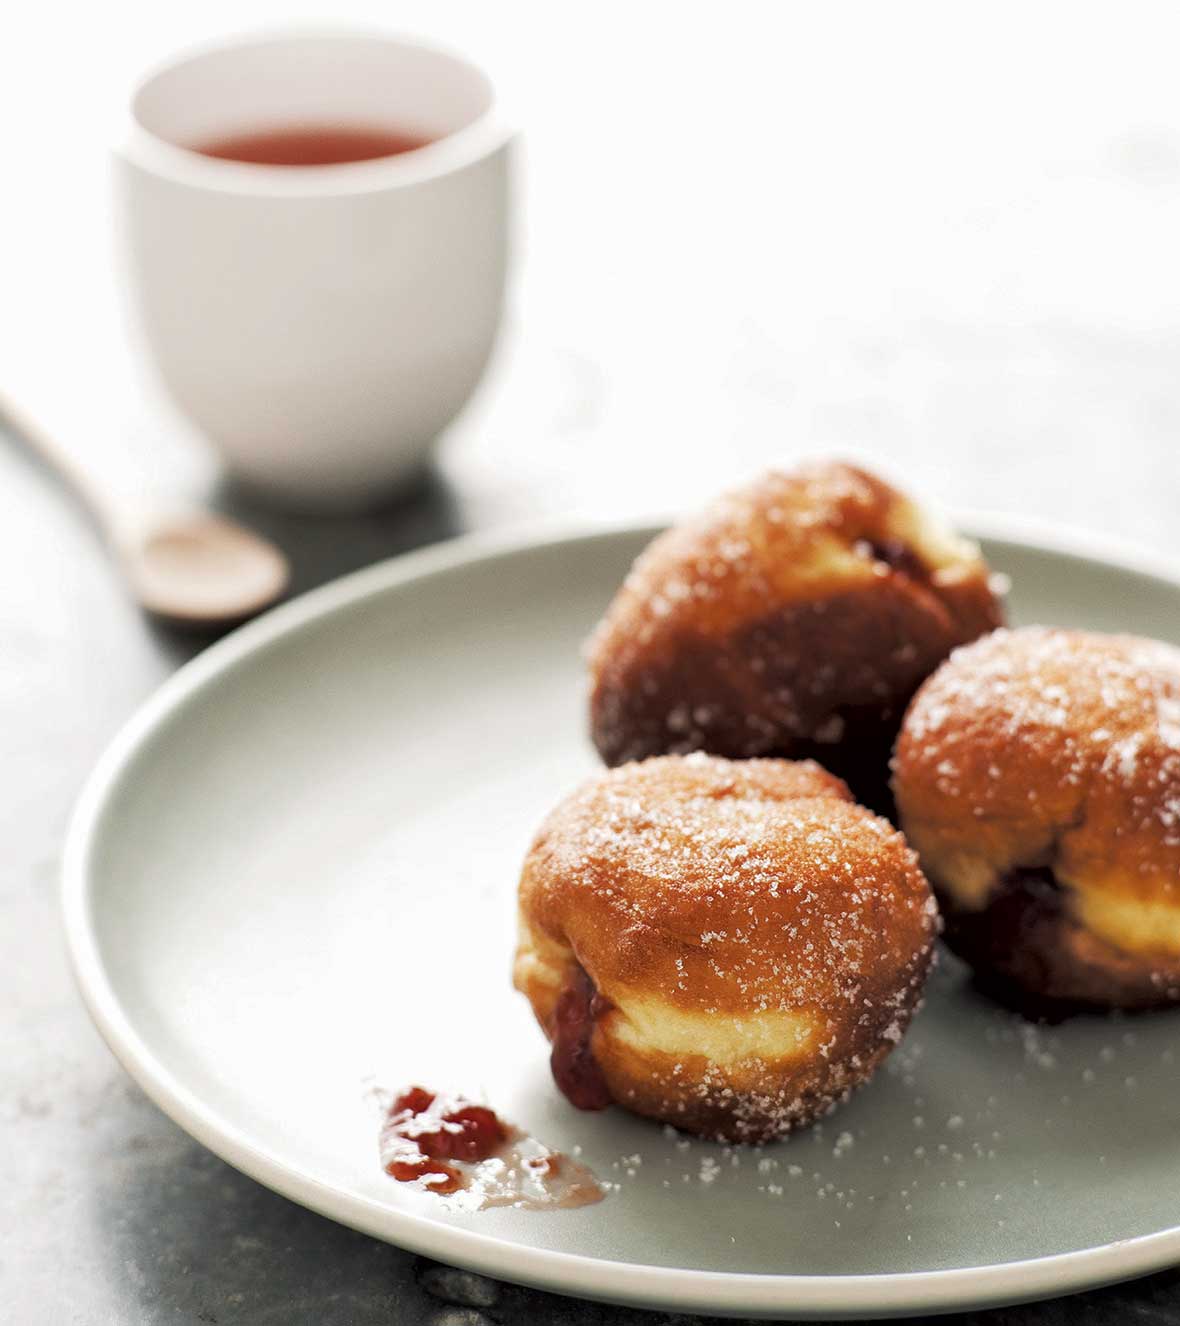 Three German Berliners, or jelly doughnuts, with raspberry jam spilling out on a plate with a cup of coffee